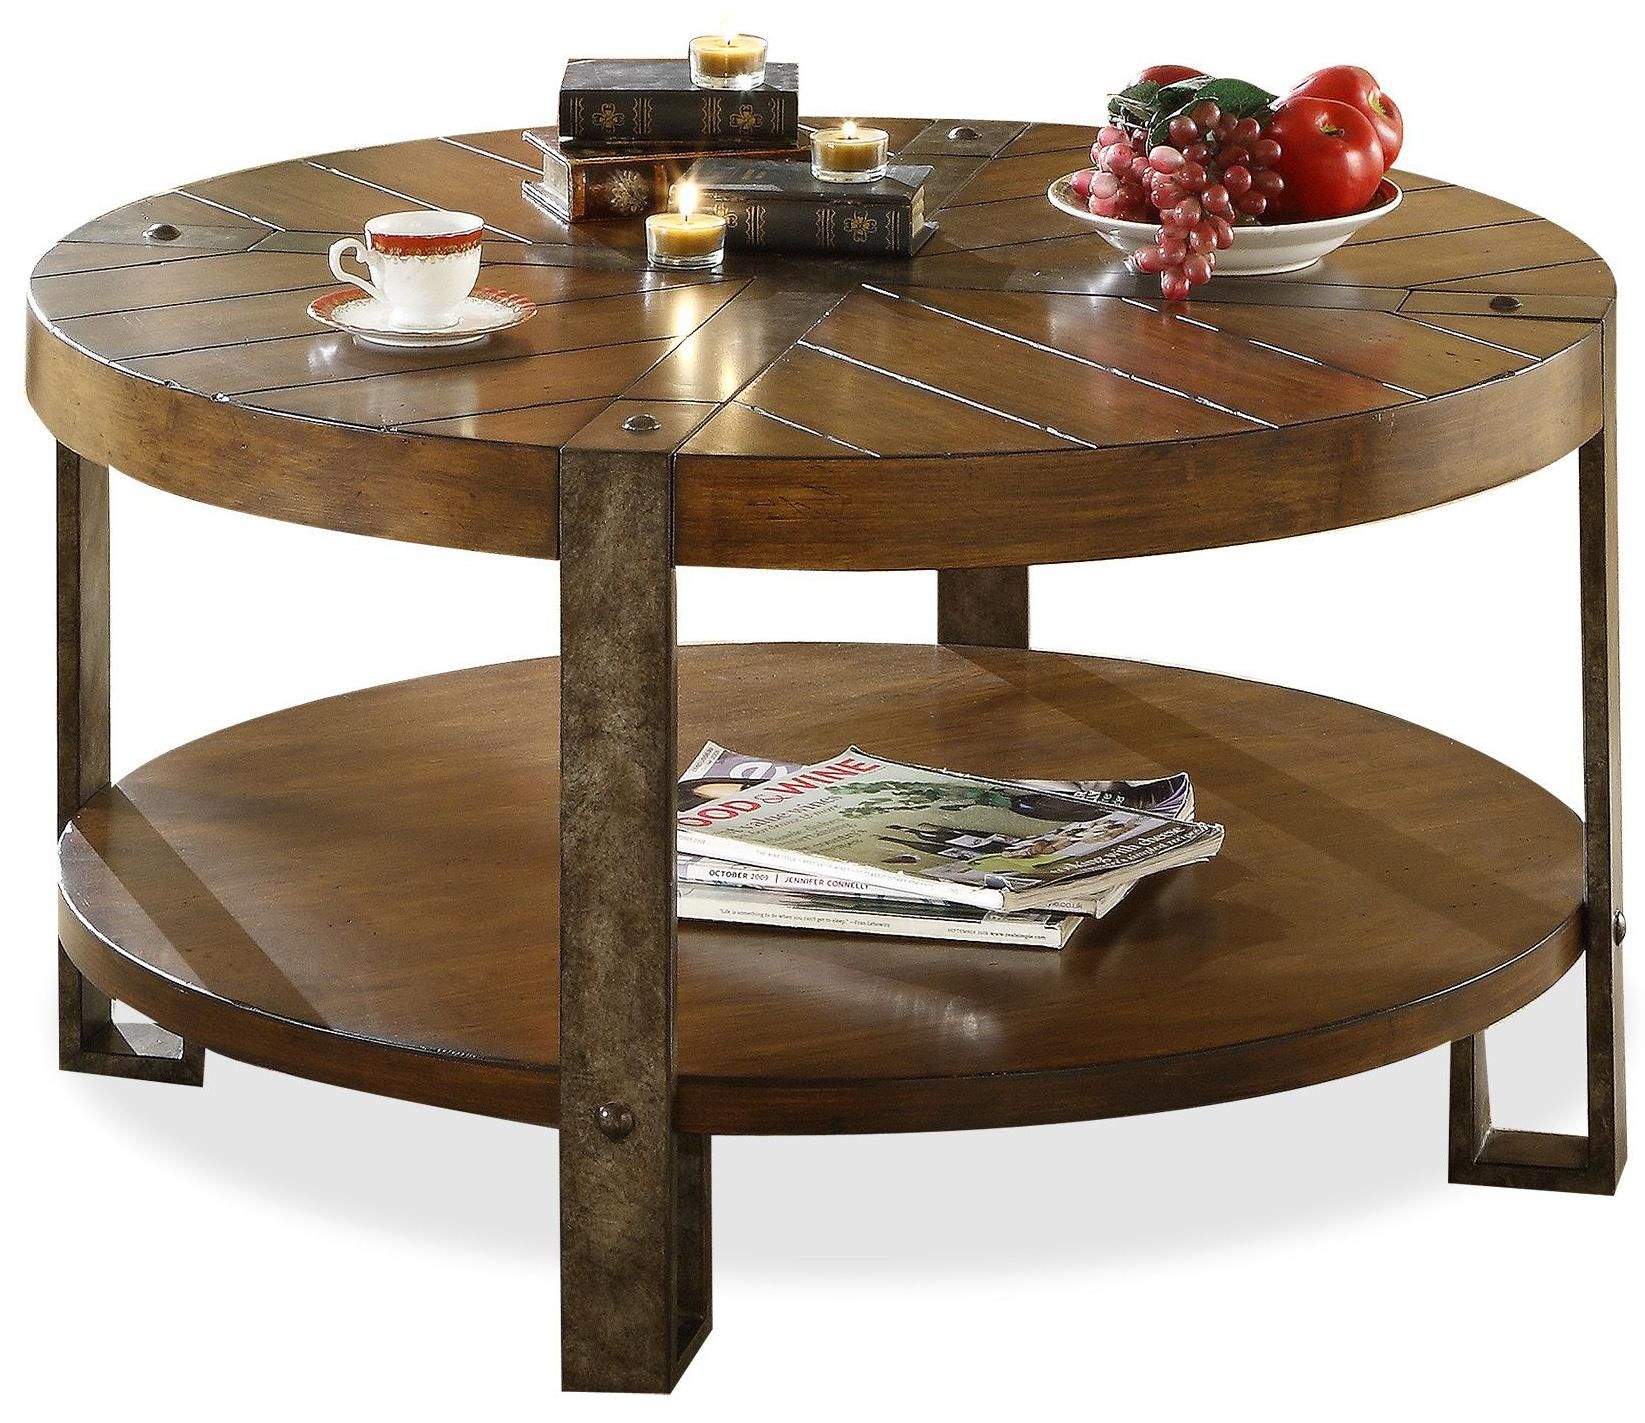 Awesome Round Coffee Tables With Storage | Homesfeed For Coffee Tables With Round Wooden Tops (View 2 of 15)